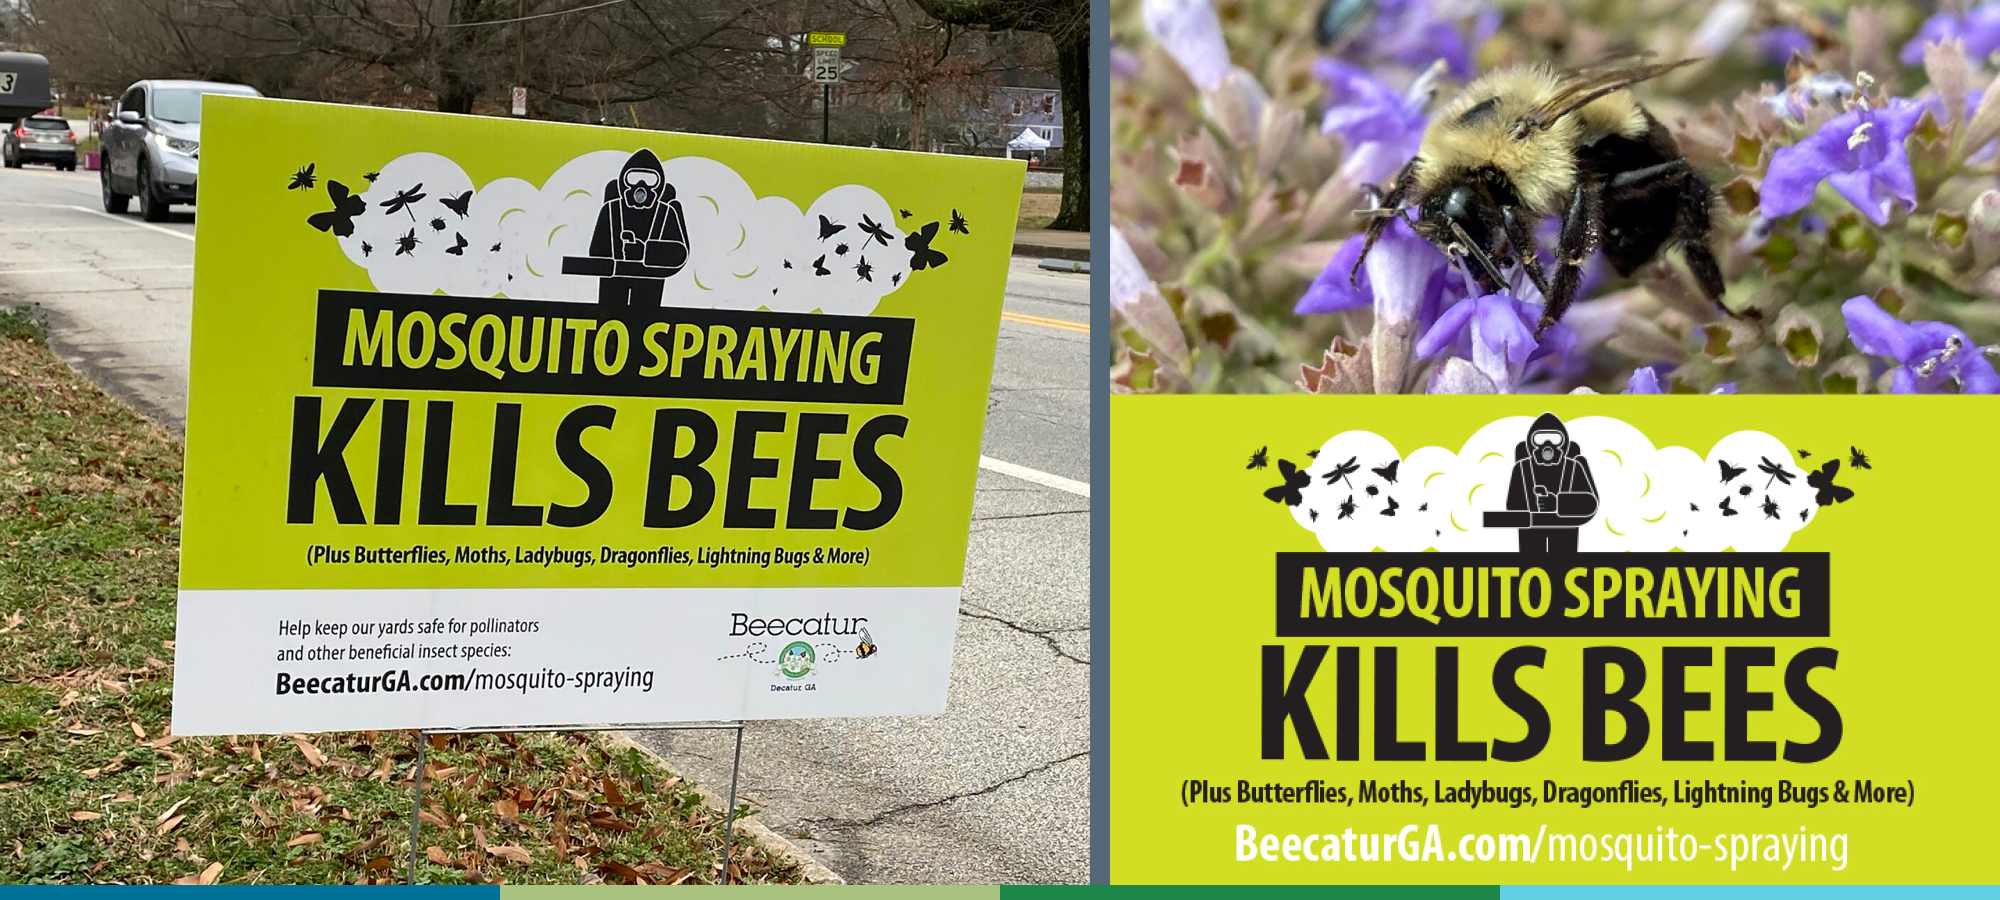 The photos that show different ways of sharing the message about mosquito spraying. On the left is a roadside sign that is a bright green color with the message “MOSQUITO SPRAYING KILLS BEES” in black text. On the right is a small graphic that has the same message, with a photograph of a hairy black-and-yellow bumble bee on purple flowers.